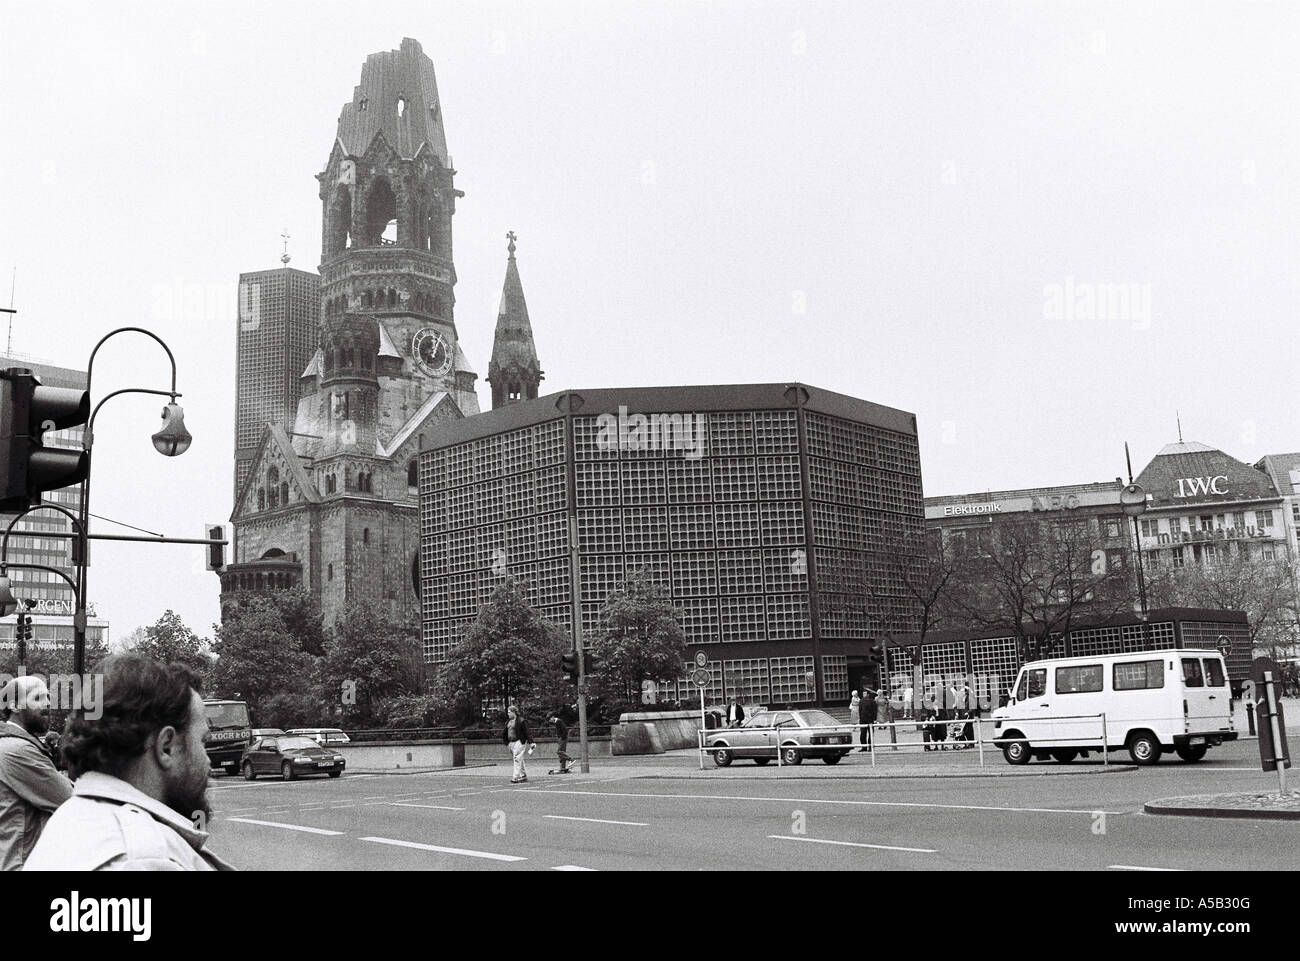 Kaiser, Whilelm, Memorial, church, Berlin, Germany, EU, OLD, historic, history, archive, 1989, 1990, Stock Photo